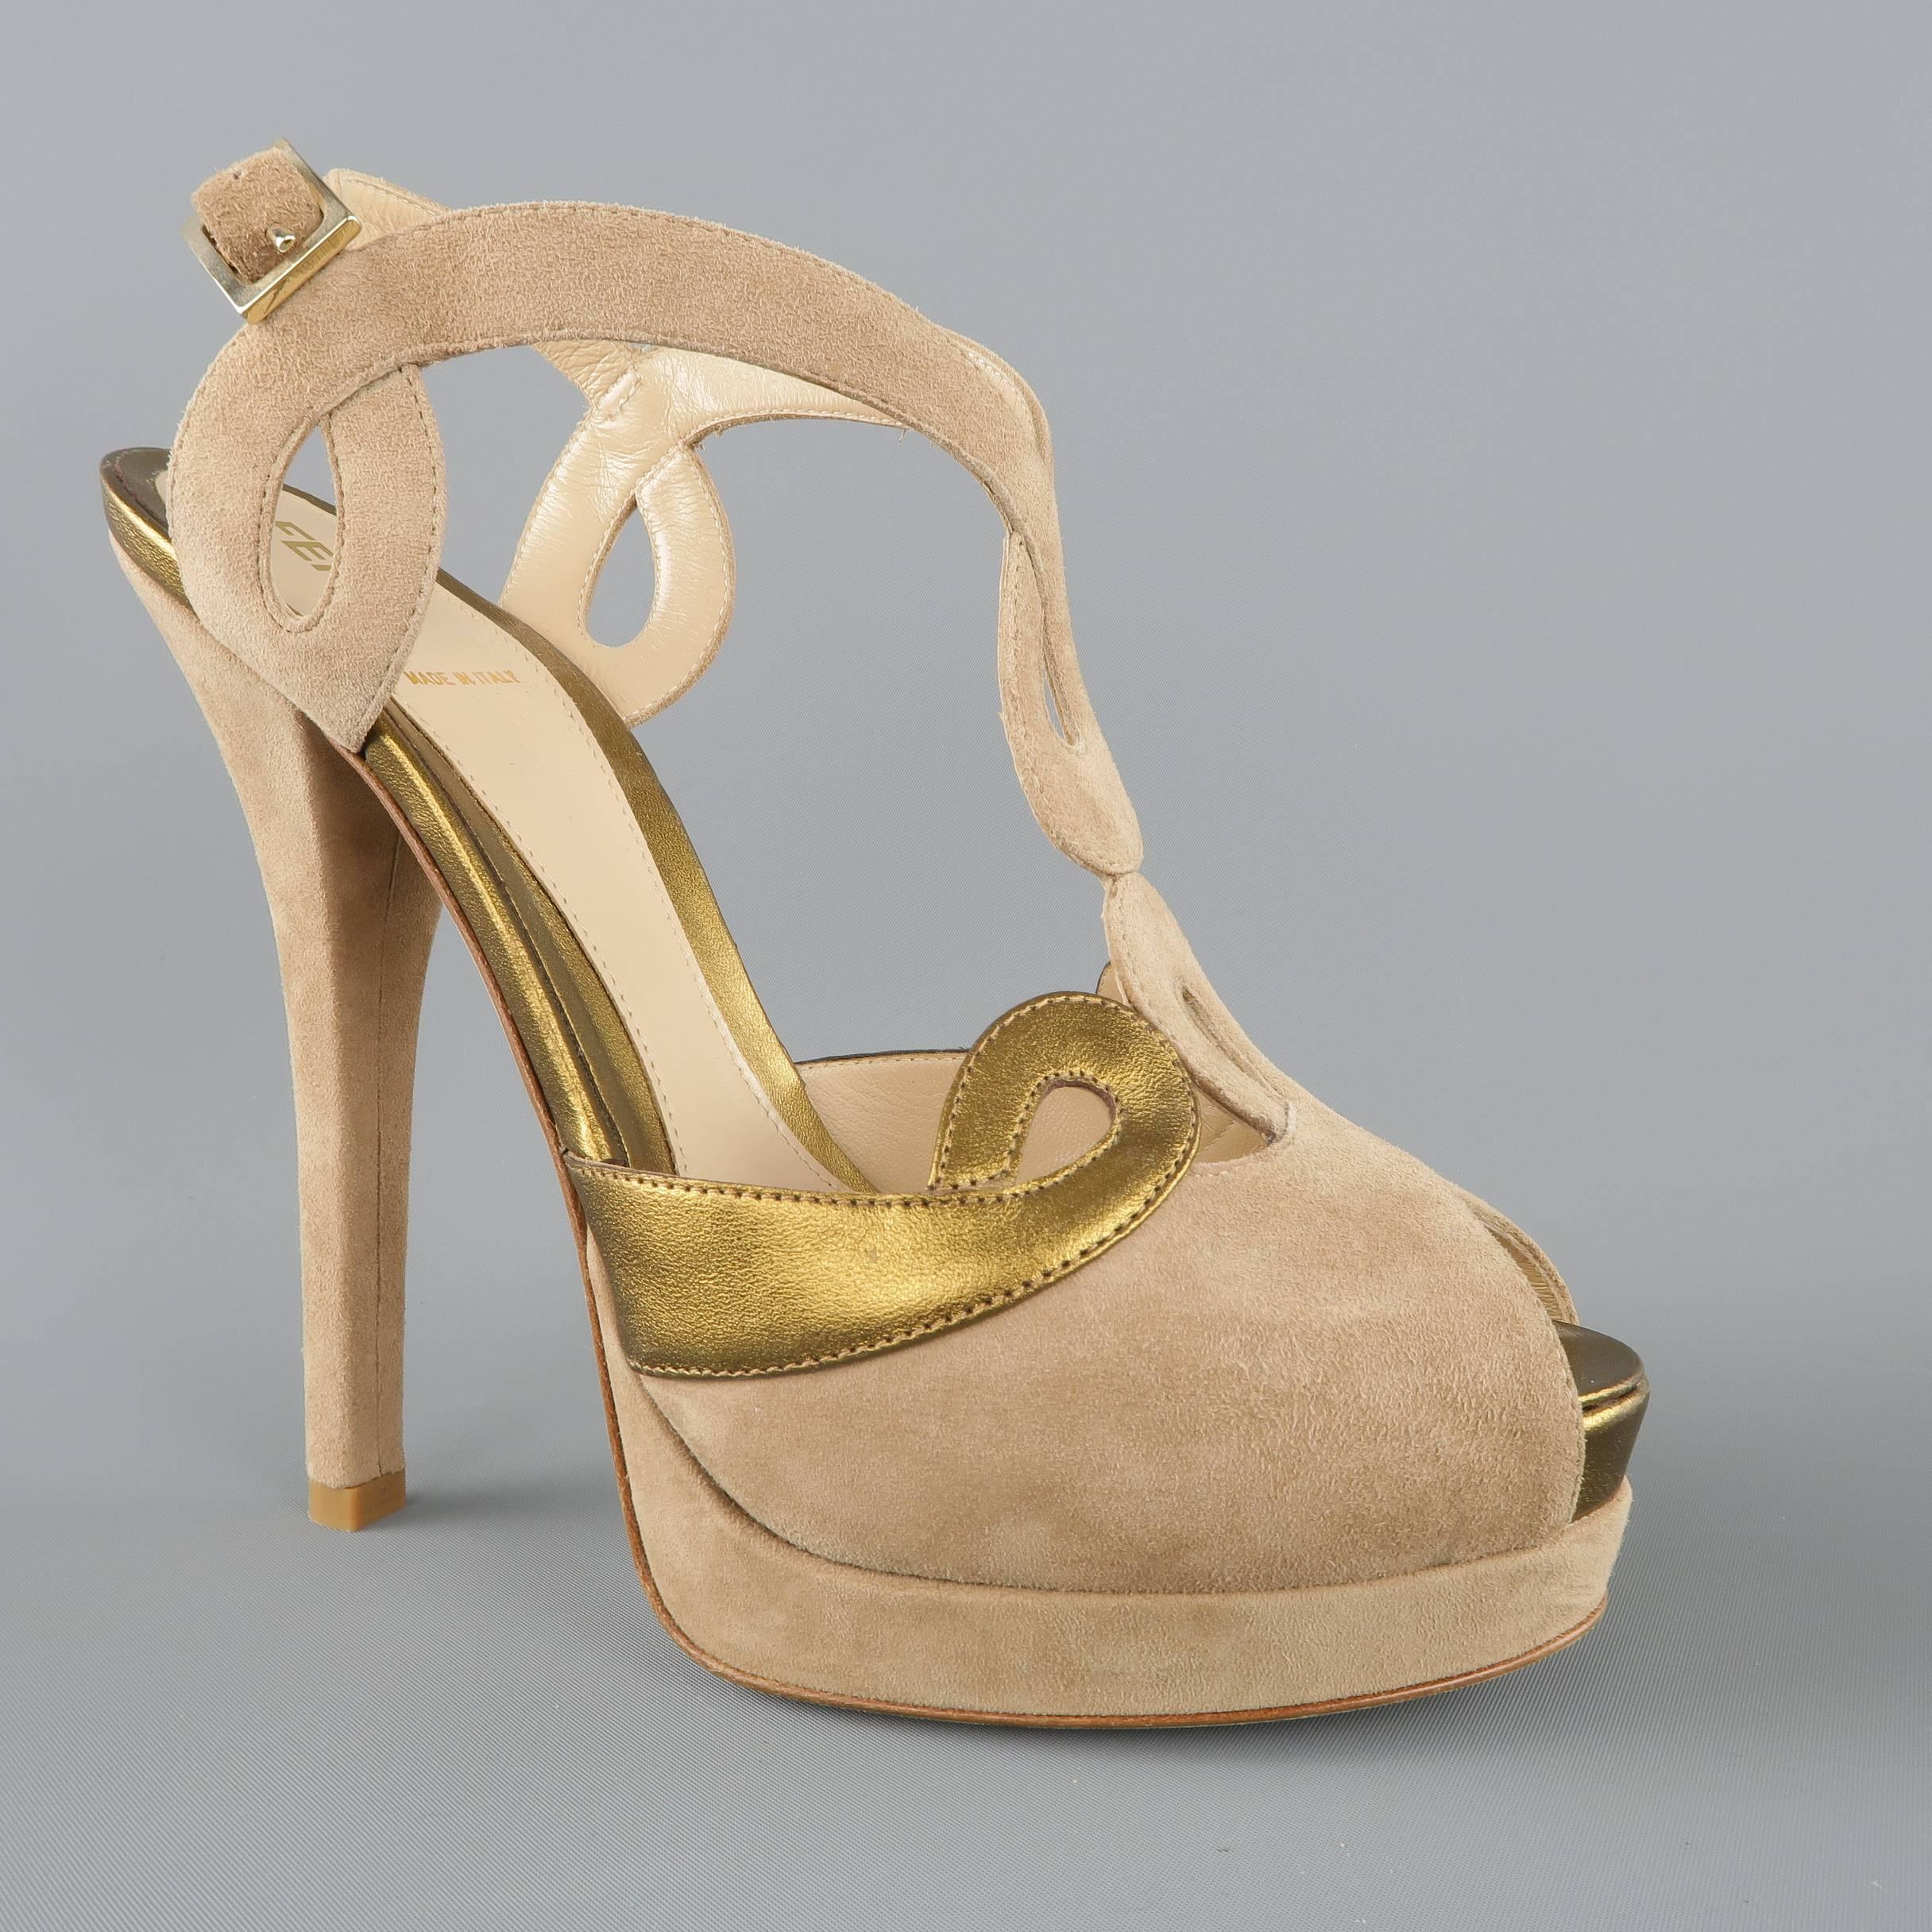 FENDI sandals come in  taupe suede and feature a peep toe, covered heel and platform, and cutout loop T strap with metallic gold details. Worn once. Made in Italy.
 
Excellent Pre-Owned Condition.
Marked: IT 39
 
Heel: 1.25 in.
Platform: 6 in.
